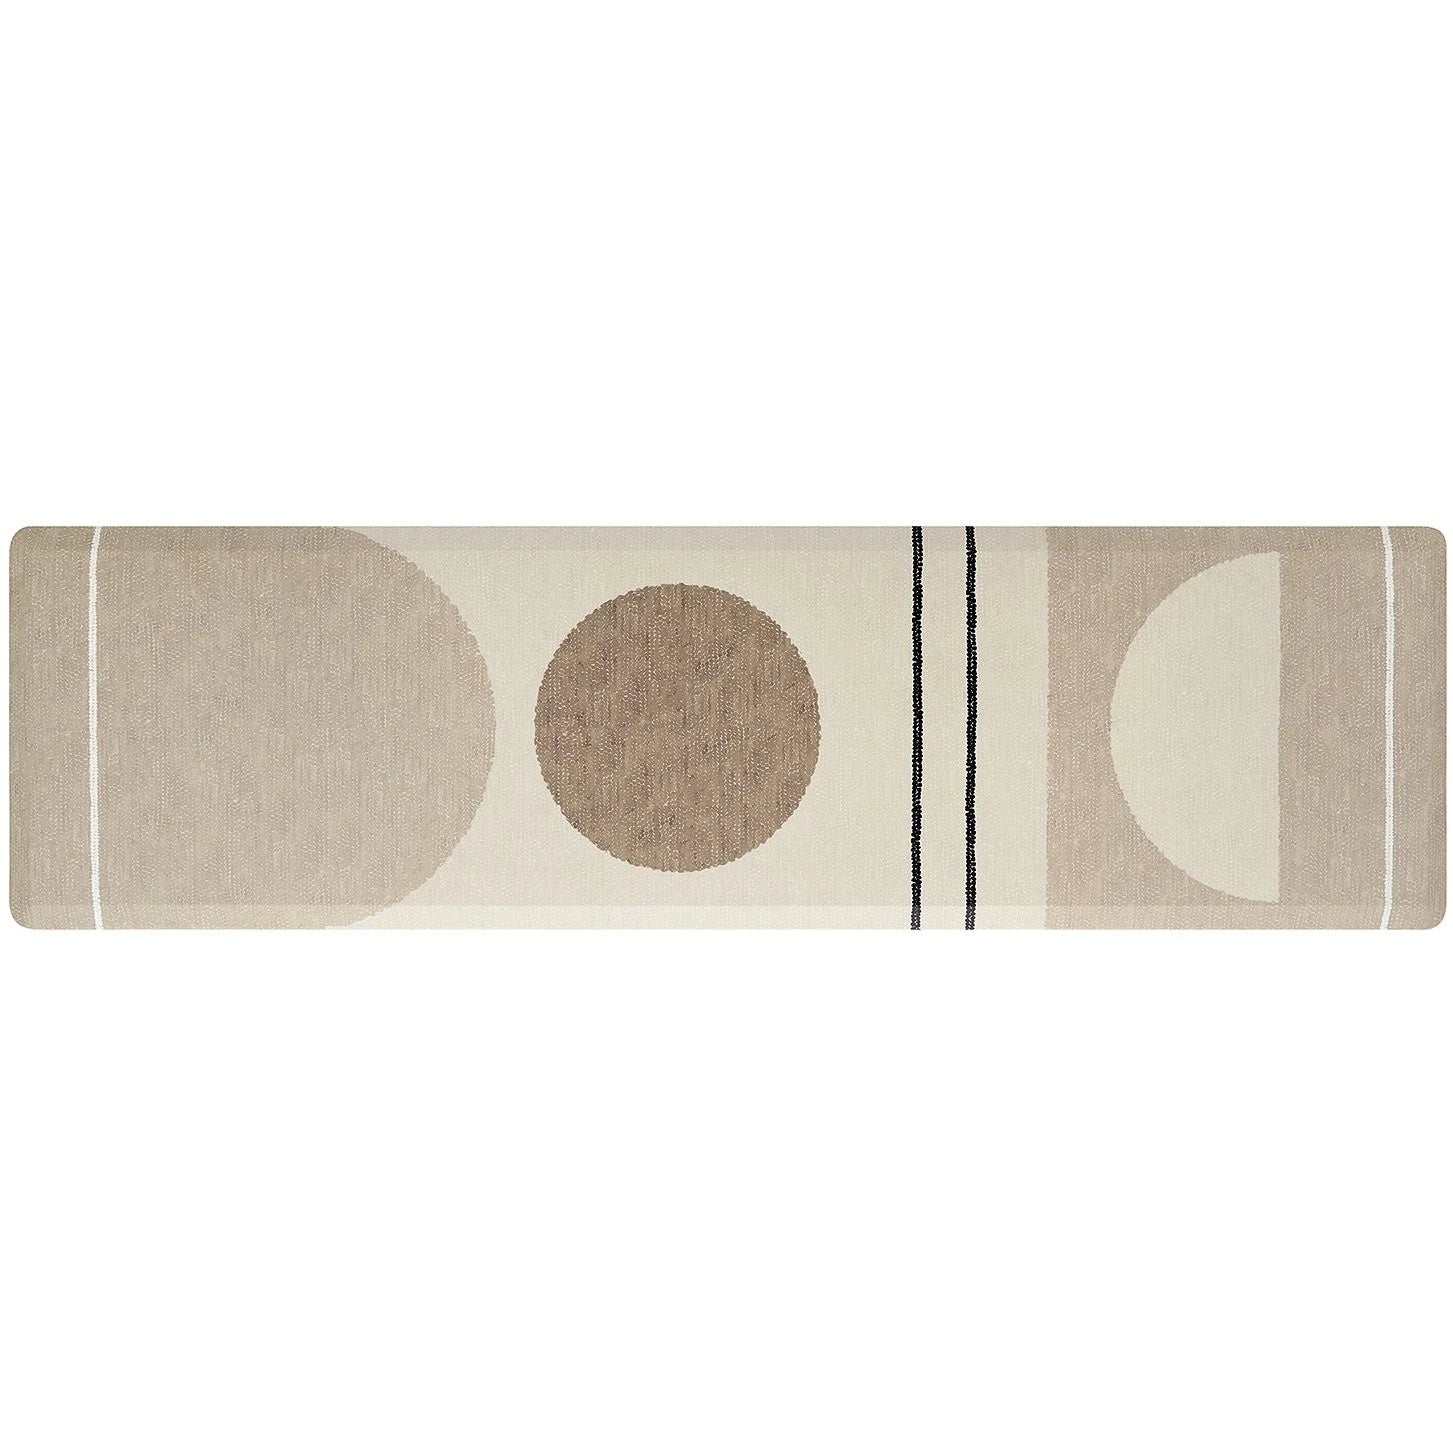 Overhead image of Geode Sesame beige, tan, and brown geometric line print standing mat in size 30x108